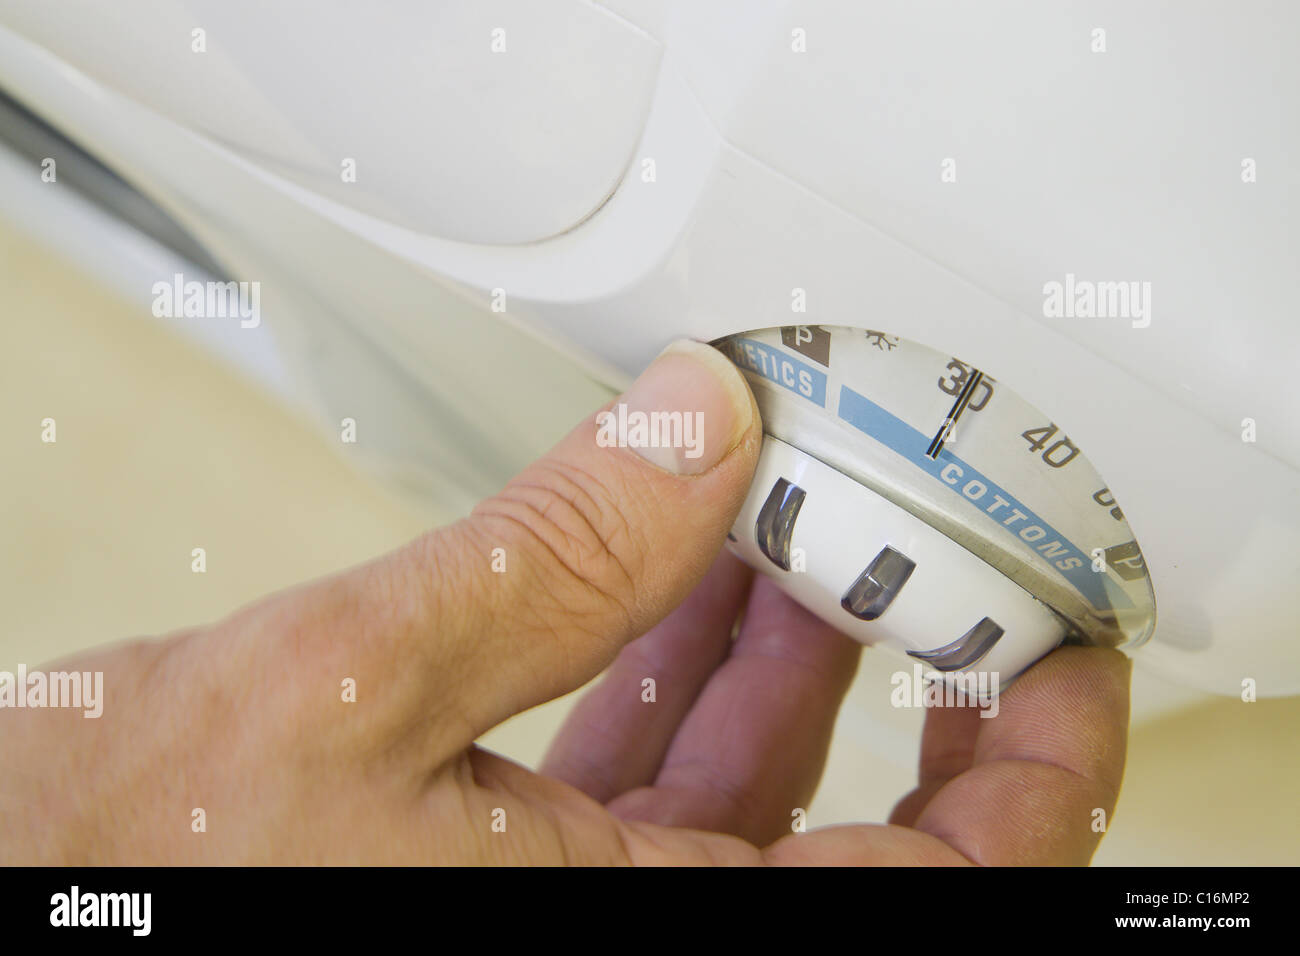 A person setting the dial of a washing machine to 30 degrees Stock Photo